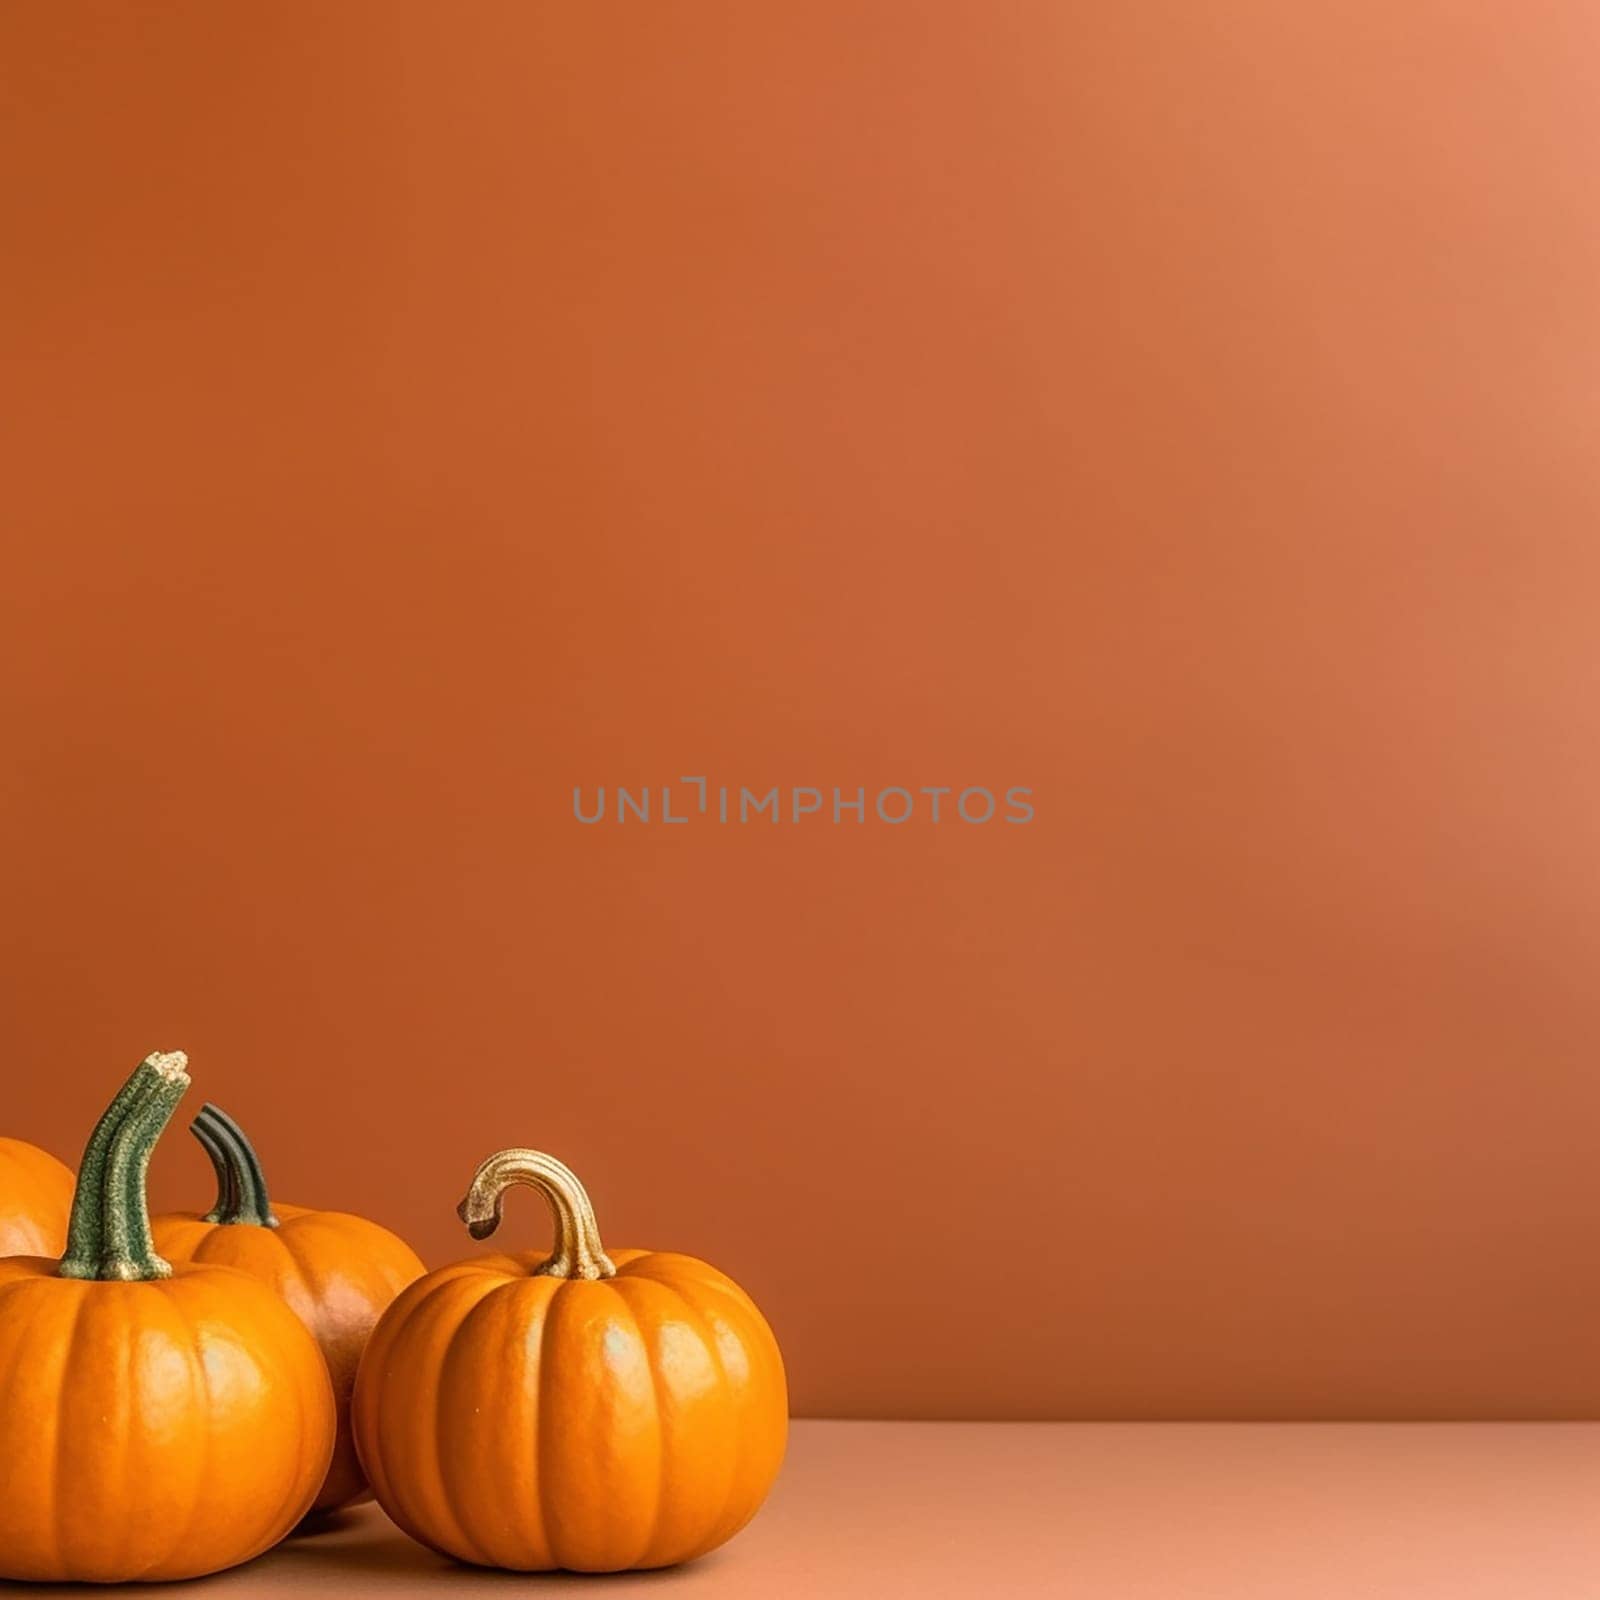 An Halloween background with scary and creepy carved pumpkin, orange background by Hype2art